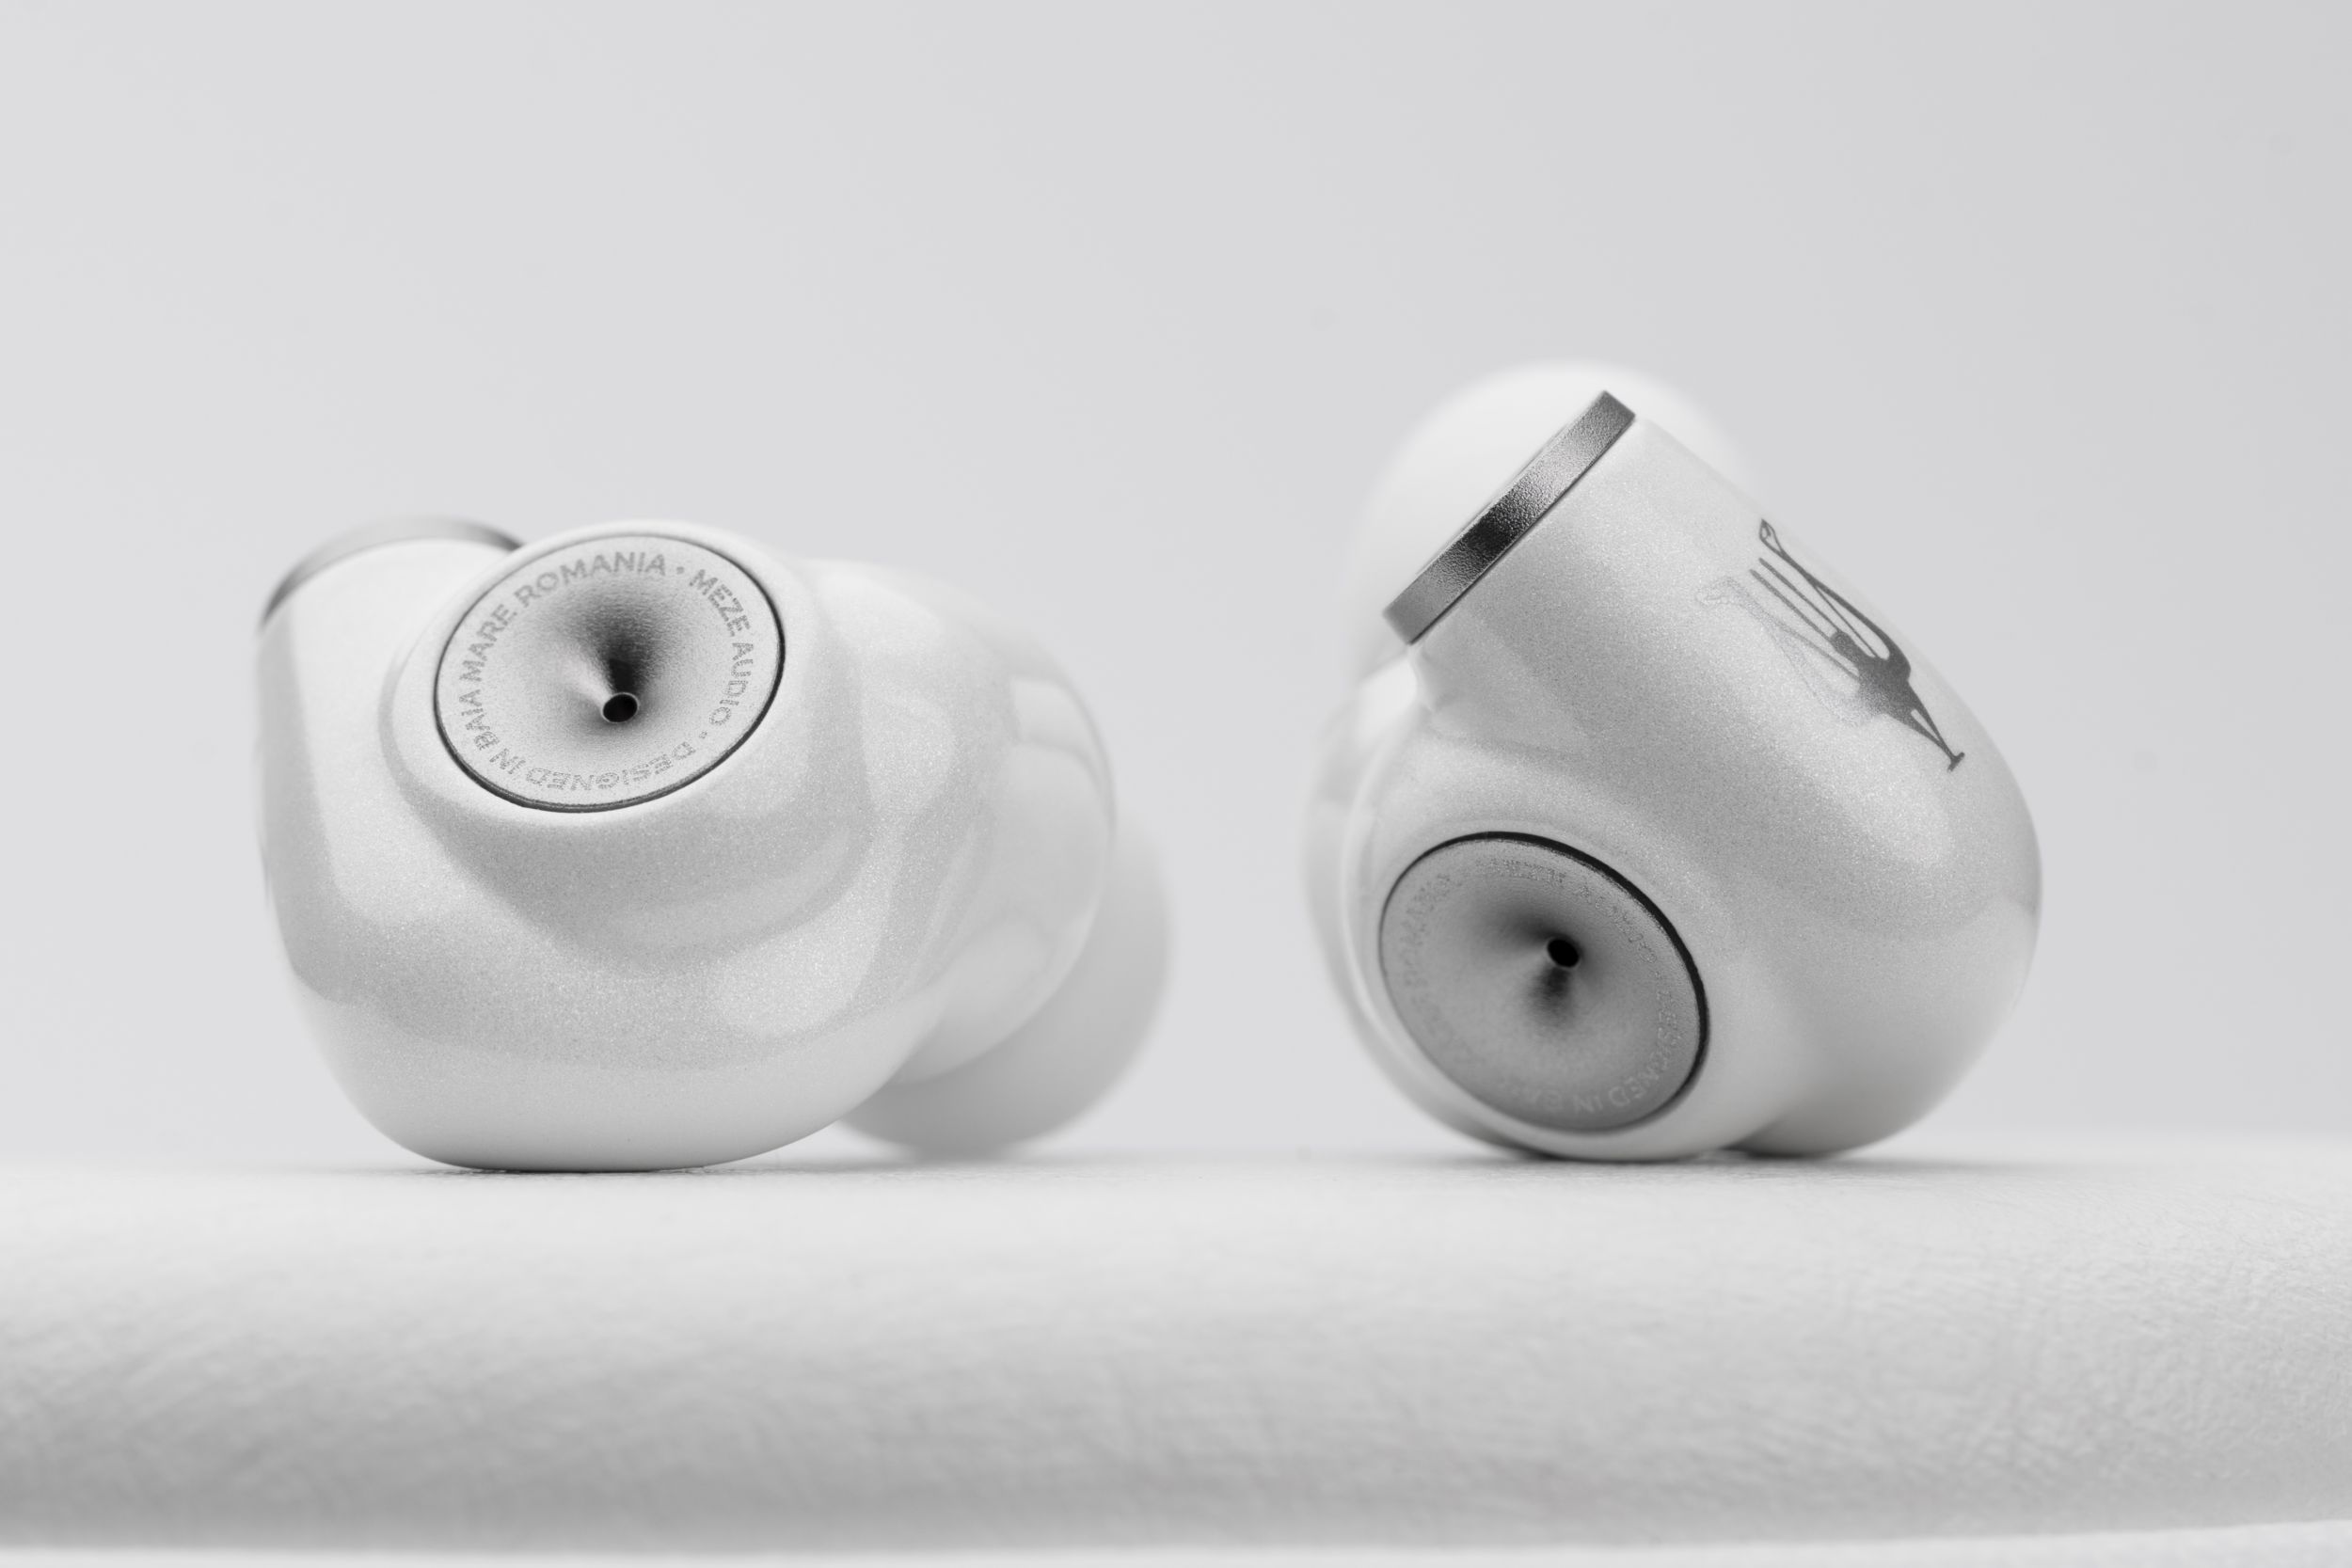 Meze Alba in-ear monitors without cables.